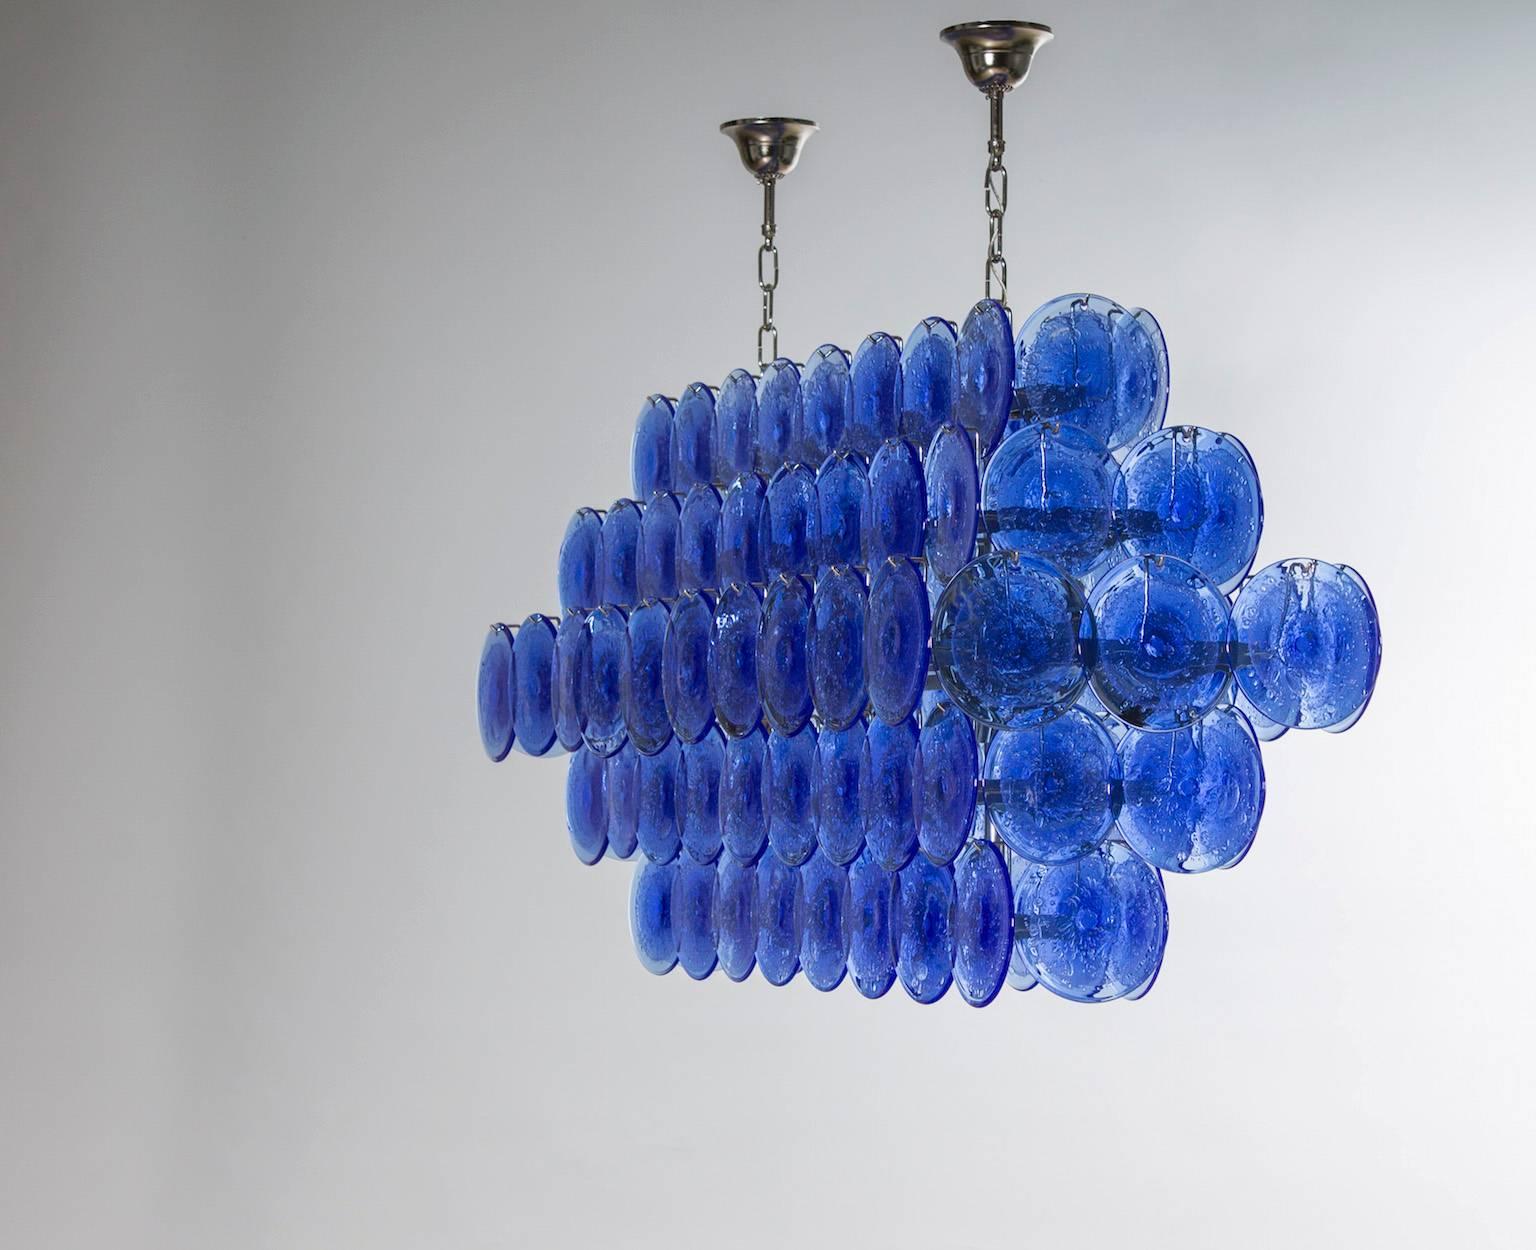 Hand-Crafted Italian Midcentury Murano Chandelier Attributed to Mazzega, circa 1980s